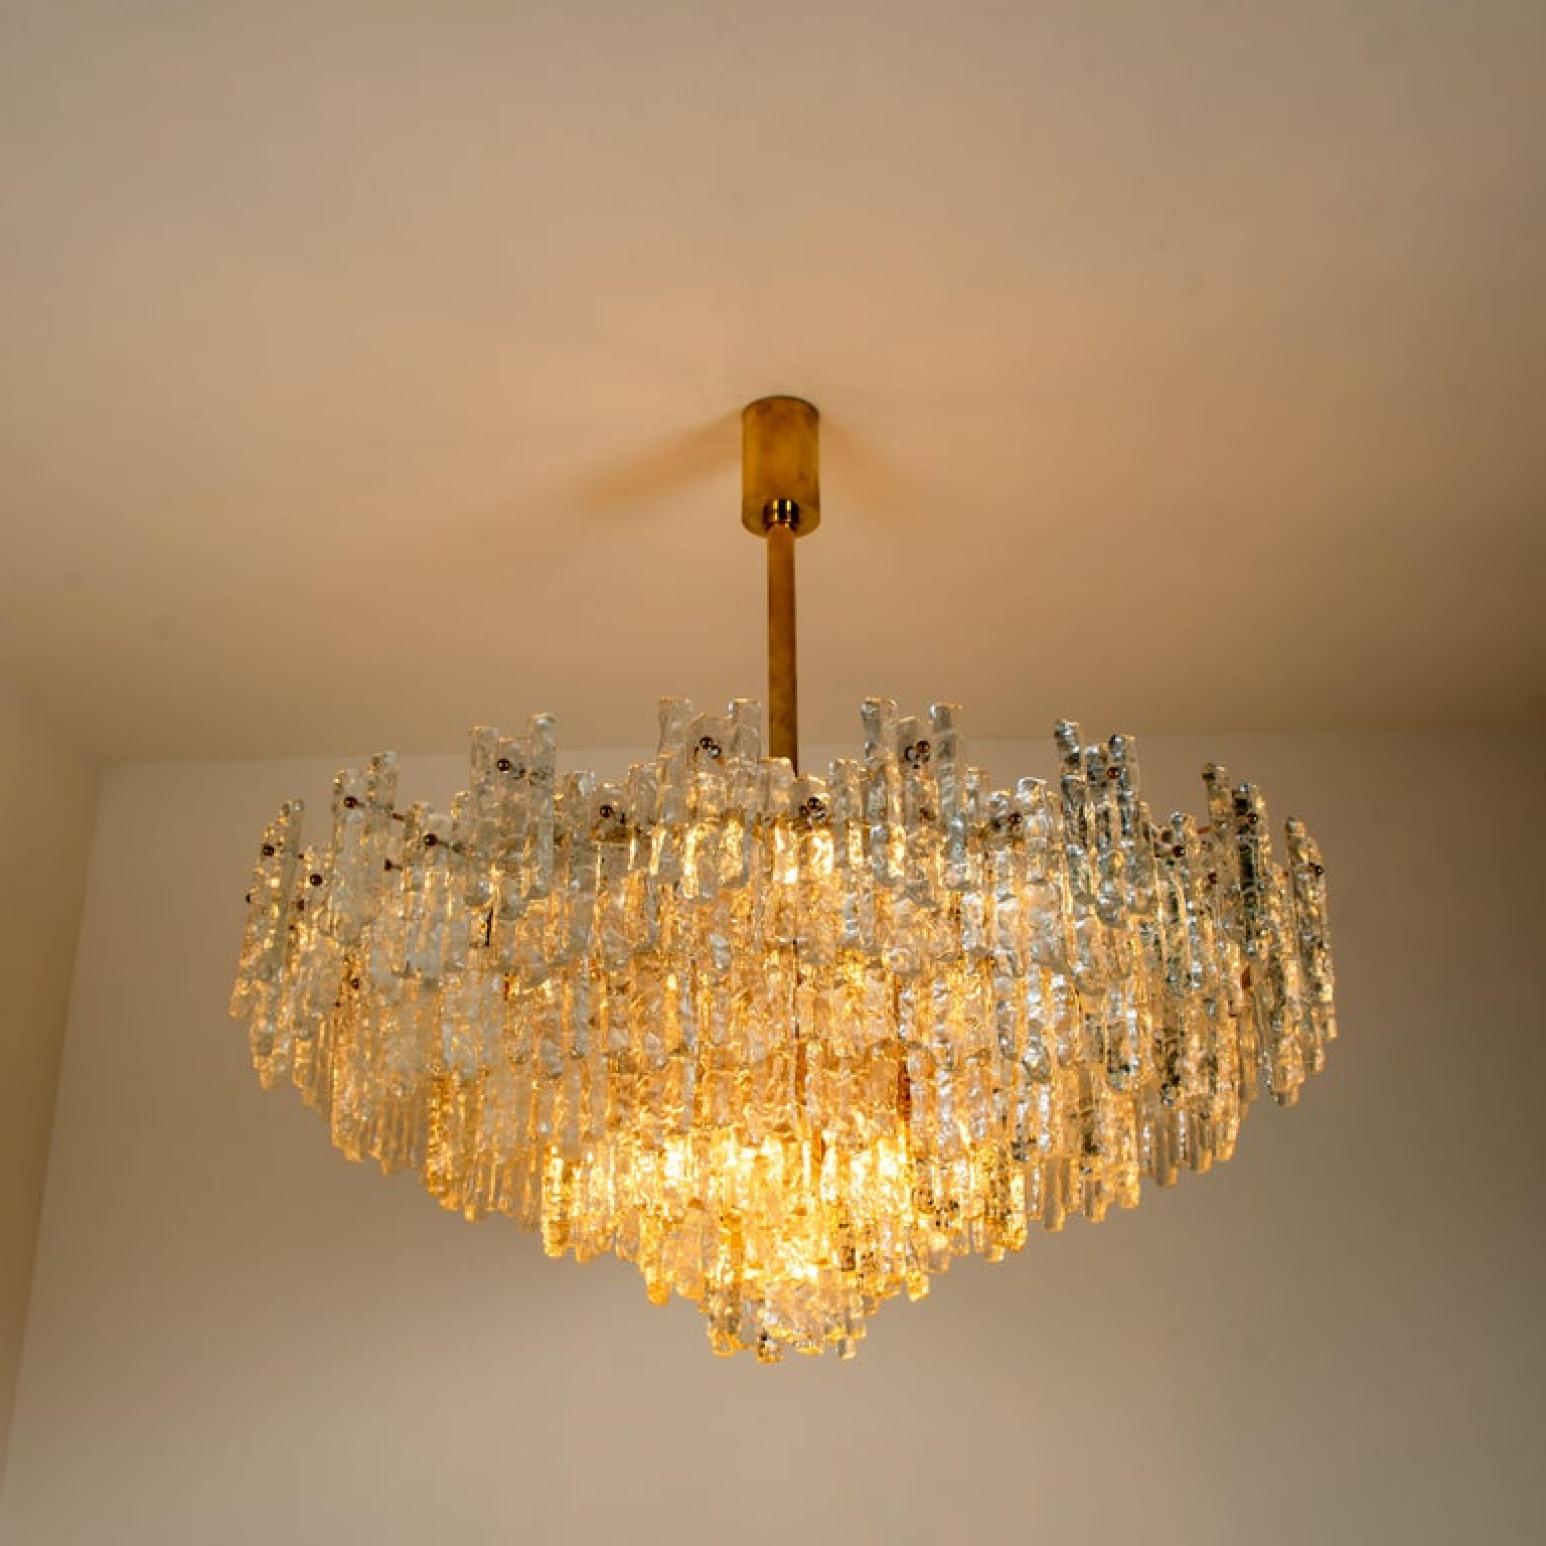 1 of the 2 Exceptional Huge Glass Flush Mount /Chandeliers by J.T. Kalmar, 1960s For Sale 2